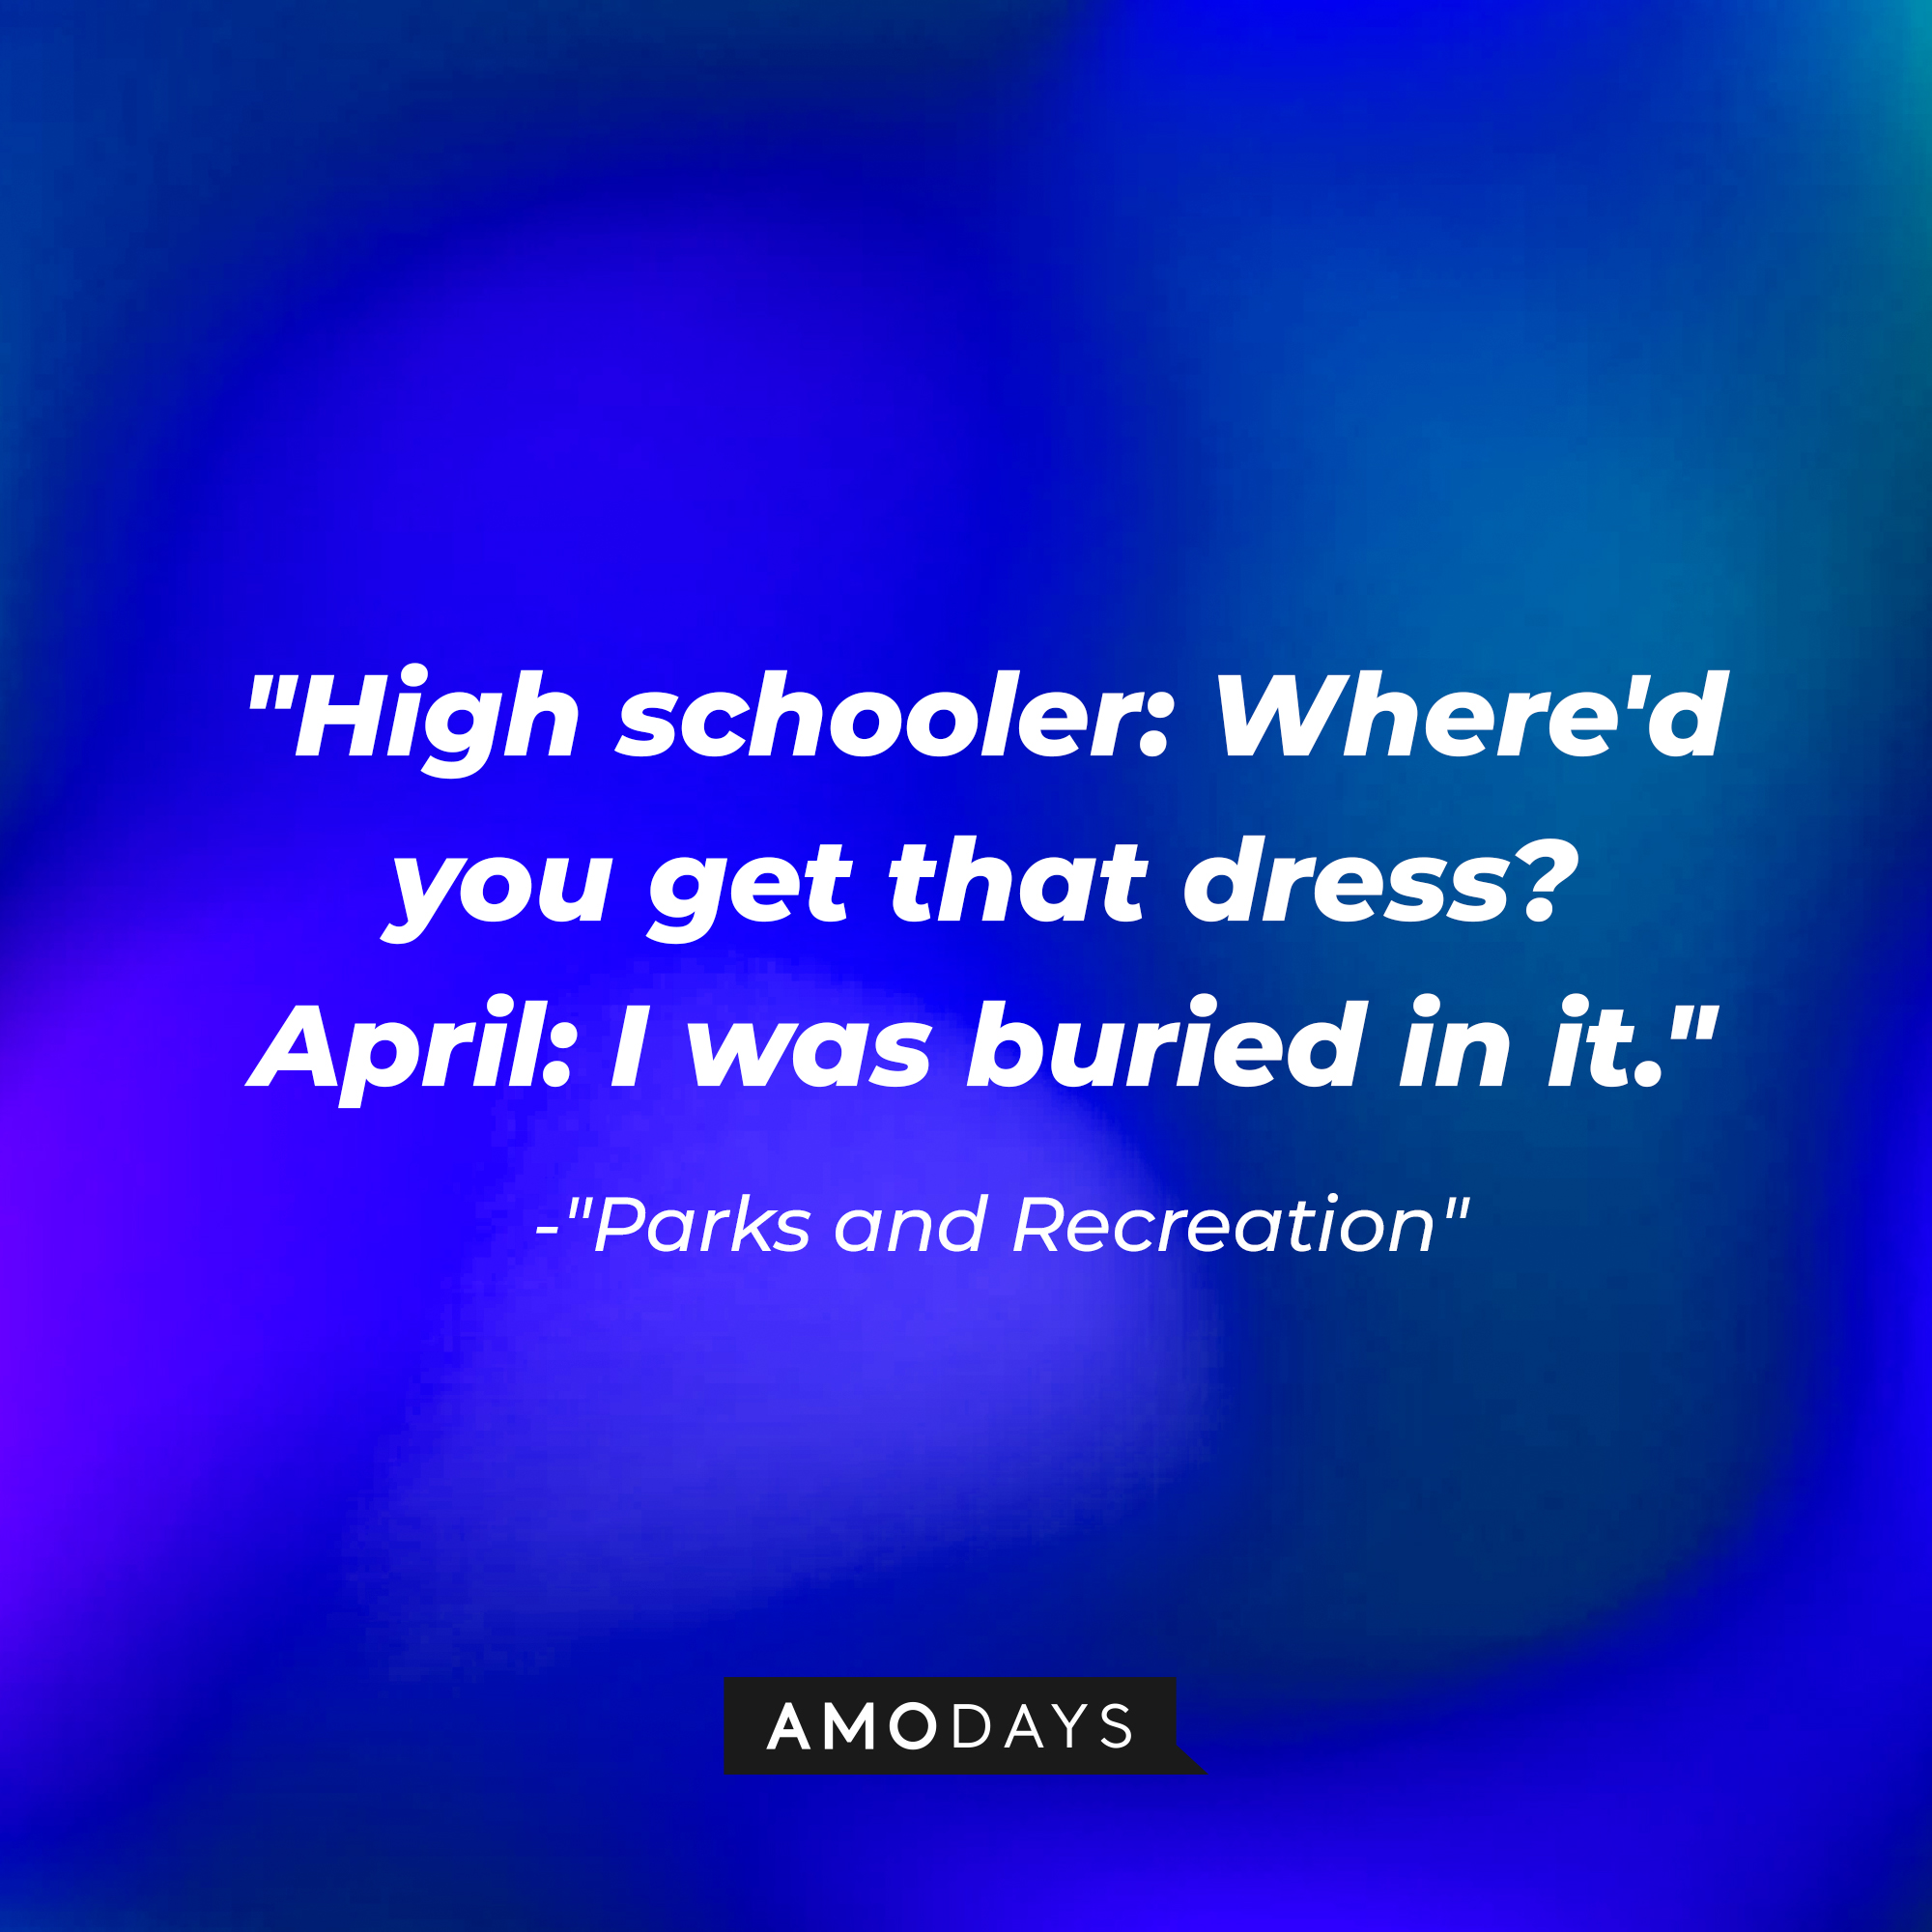 "Parks and Recreations" quote, "High schooler: Where'd you get that dress? April: I was buried in it." | Source: AmoDays